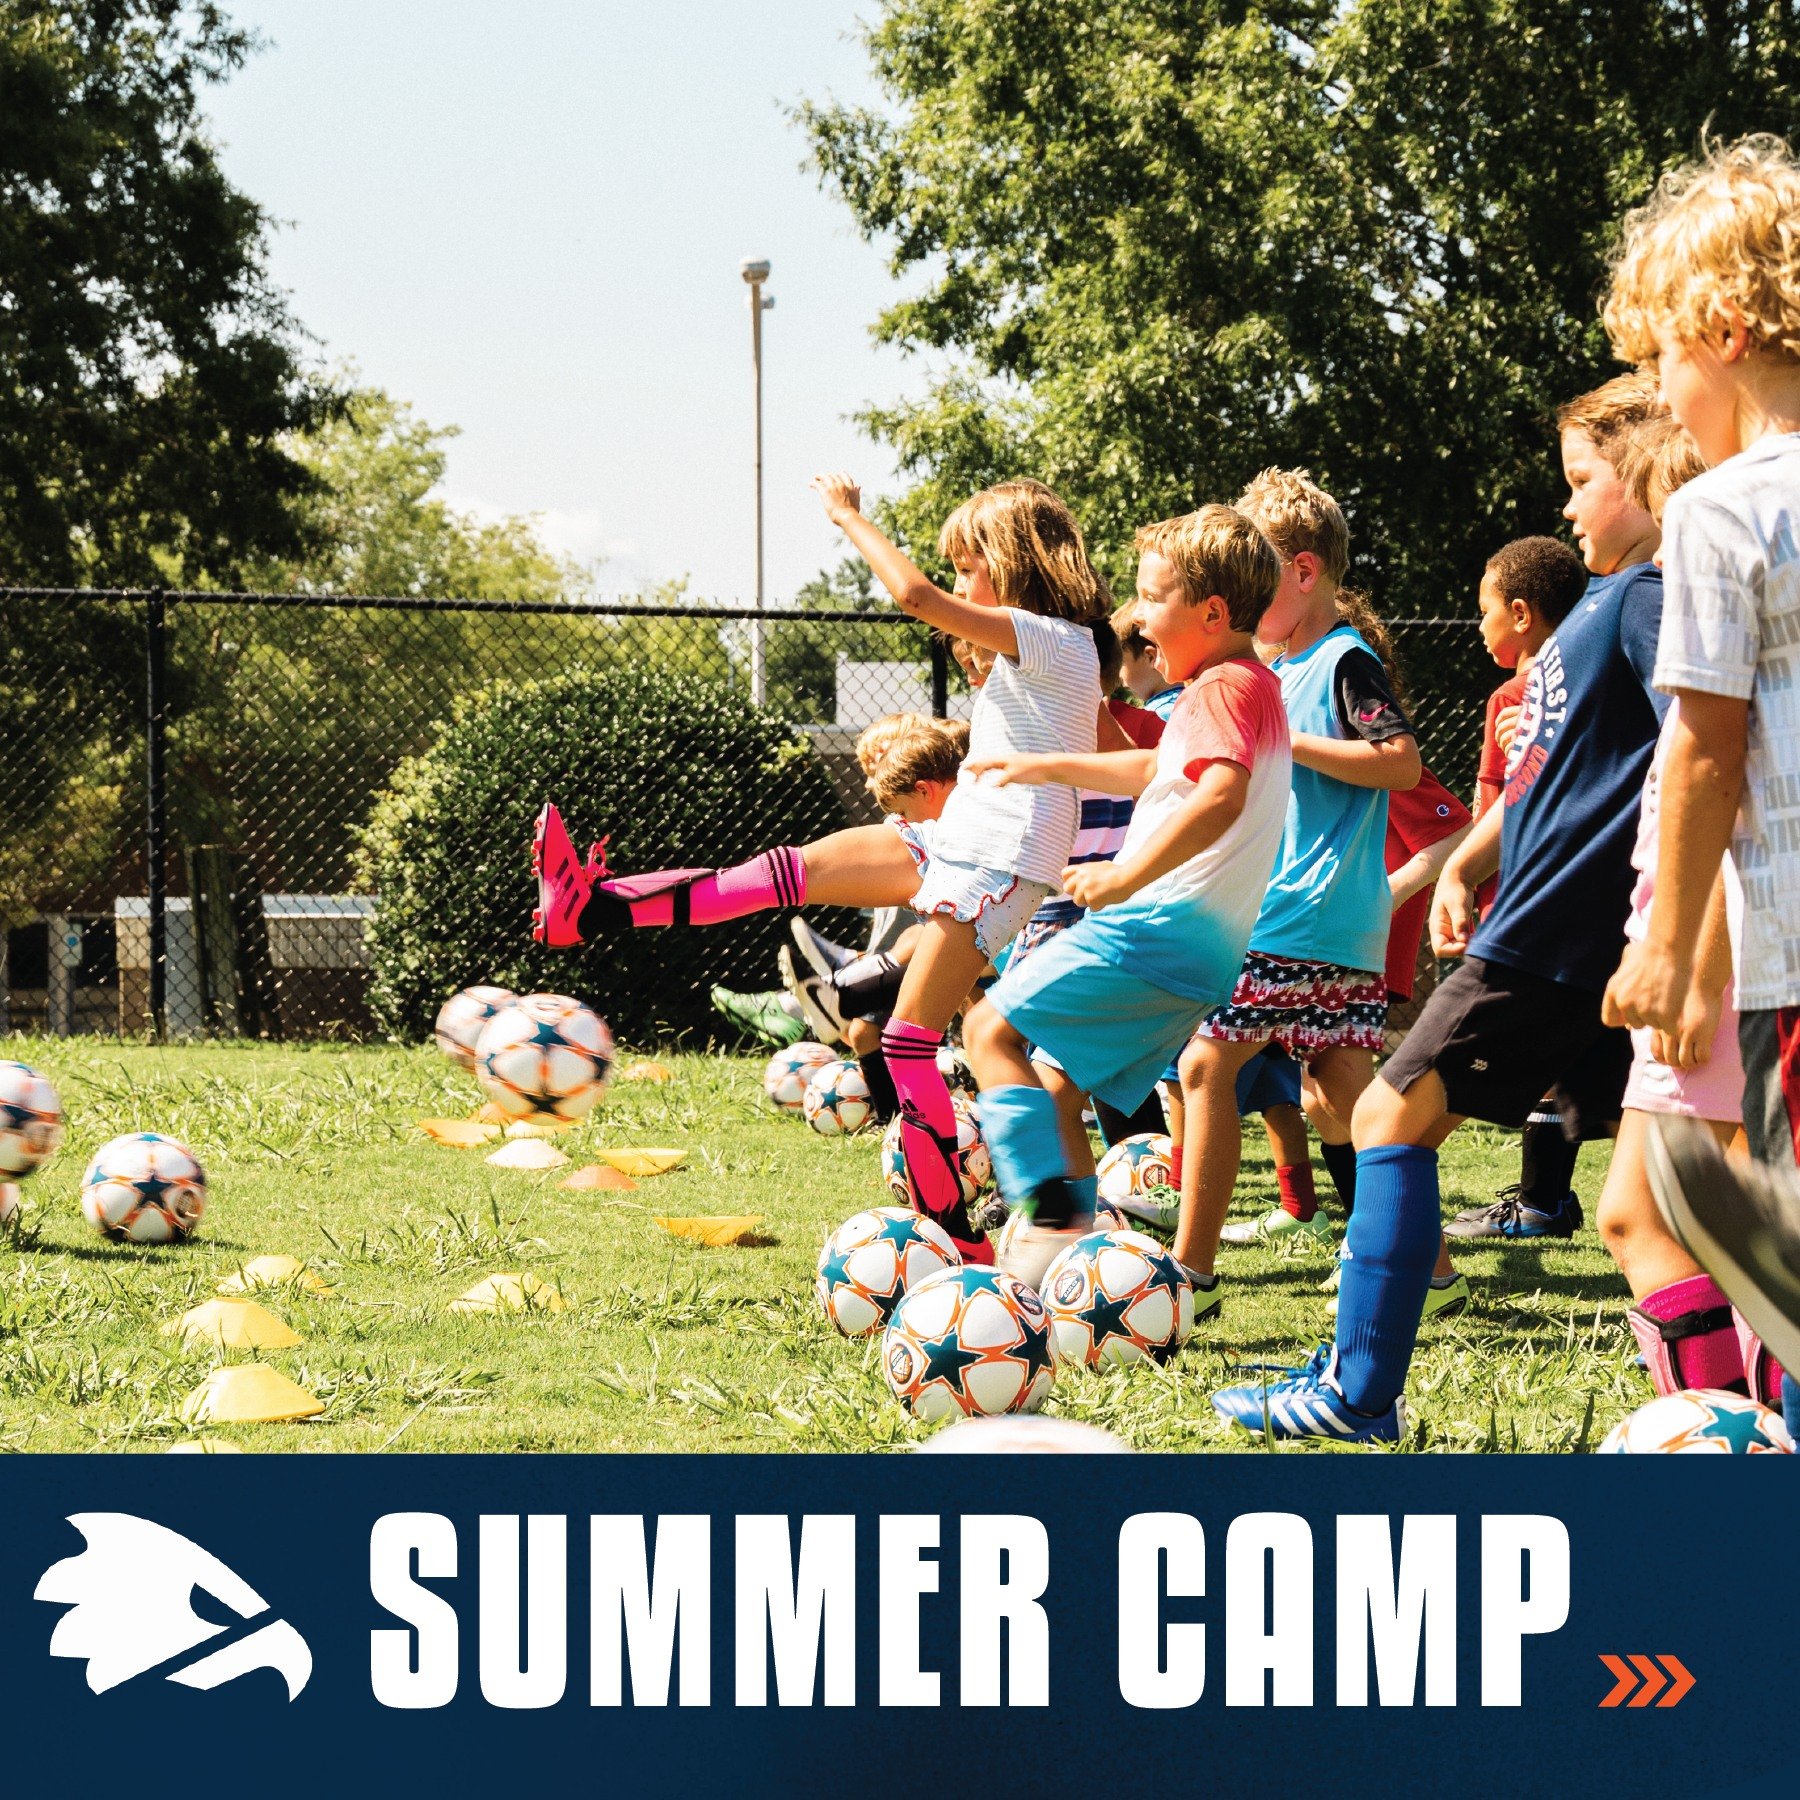 It is time to register for Charlotte Eagles Summer Camps. It is a great opportunity for your kids to spend a week growing their soccer skills, making new friends, and enjoying fun activities.

We have options across the Charlotte area for kids ages 5